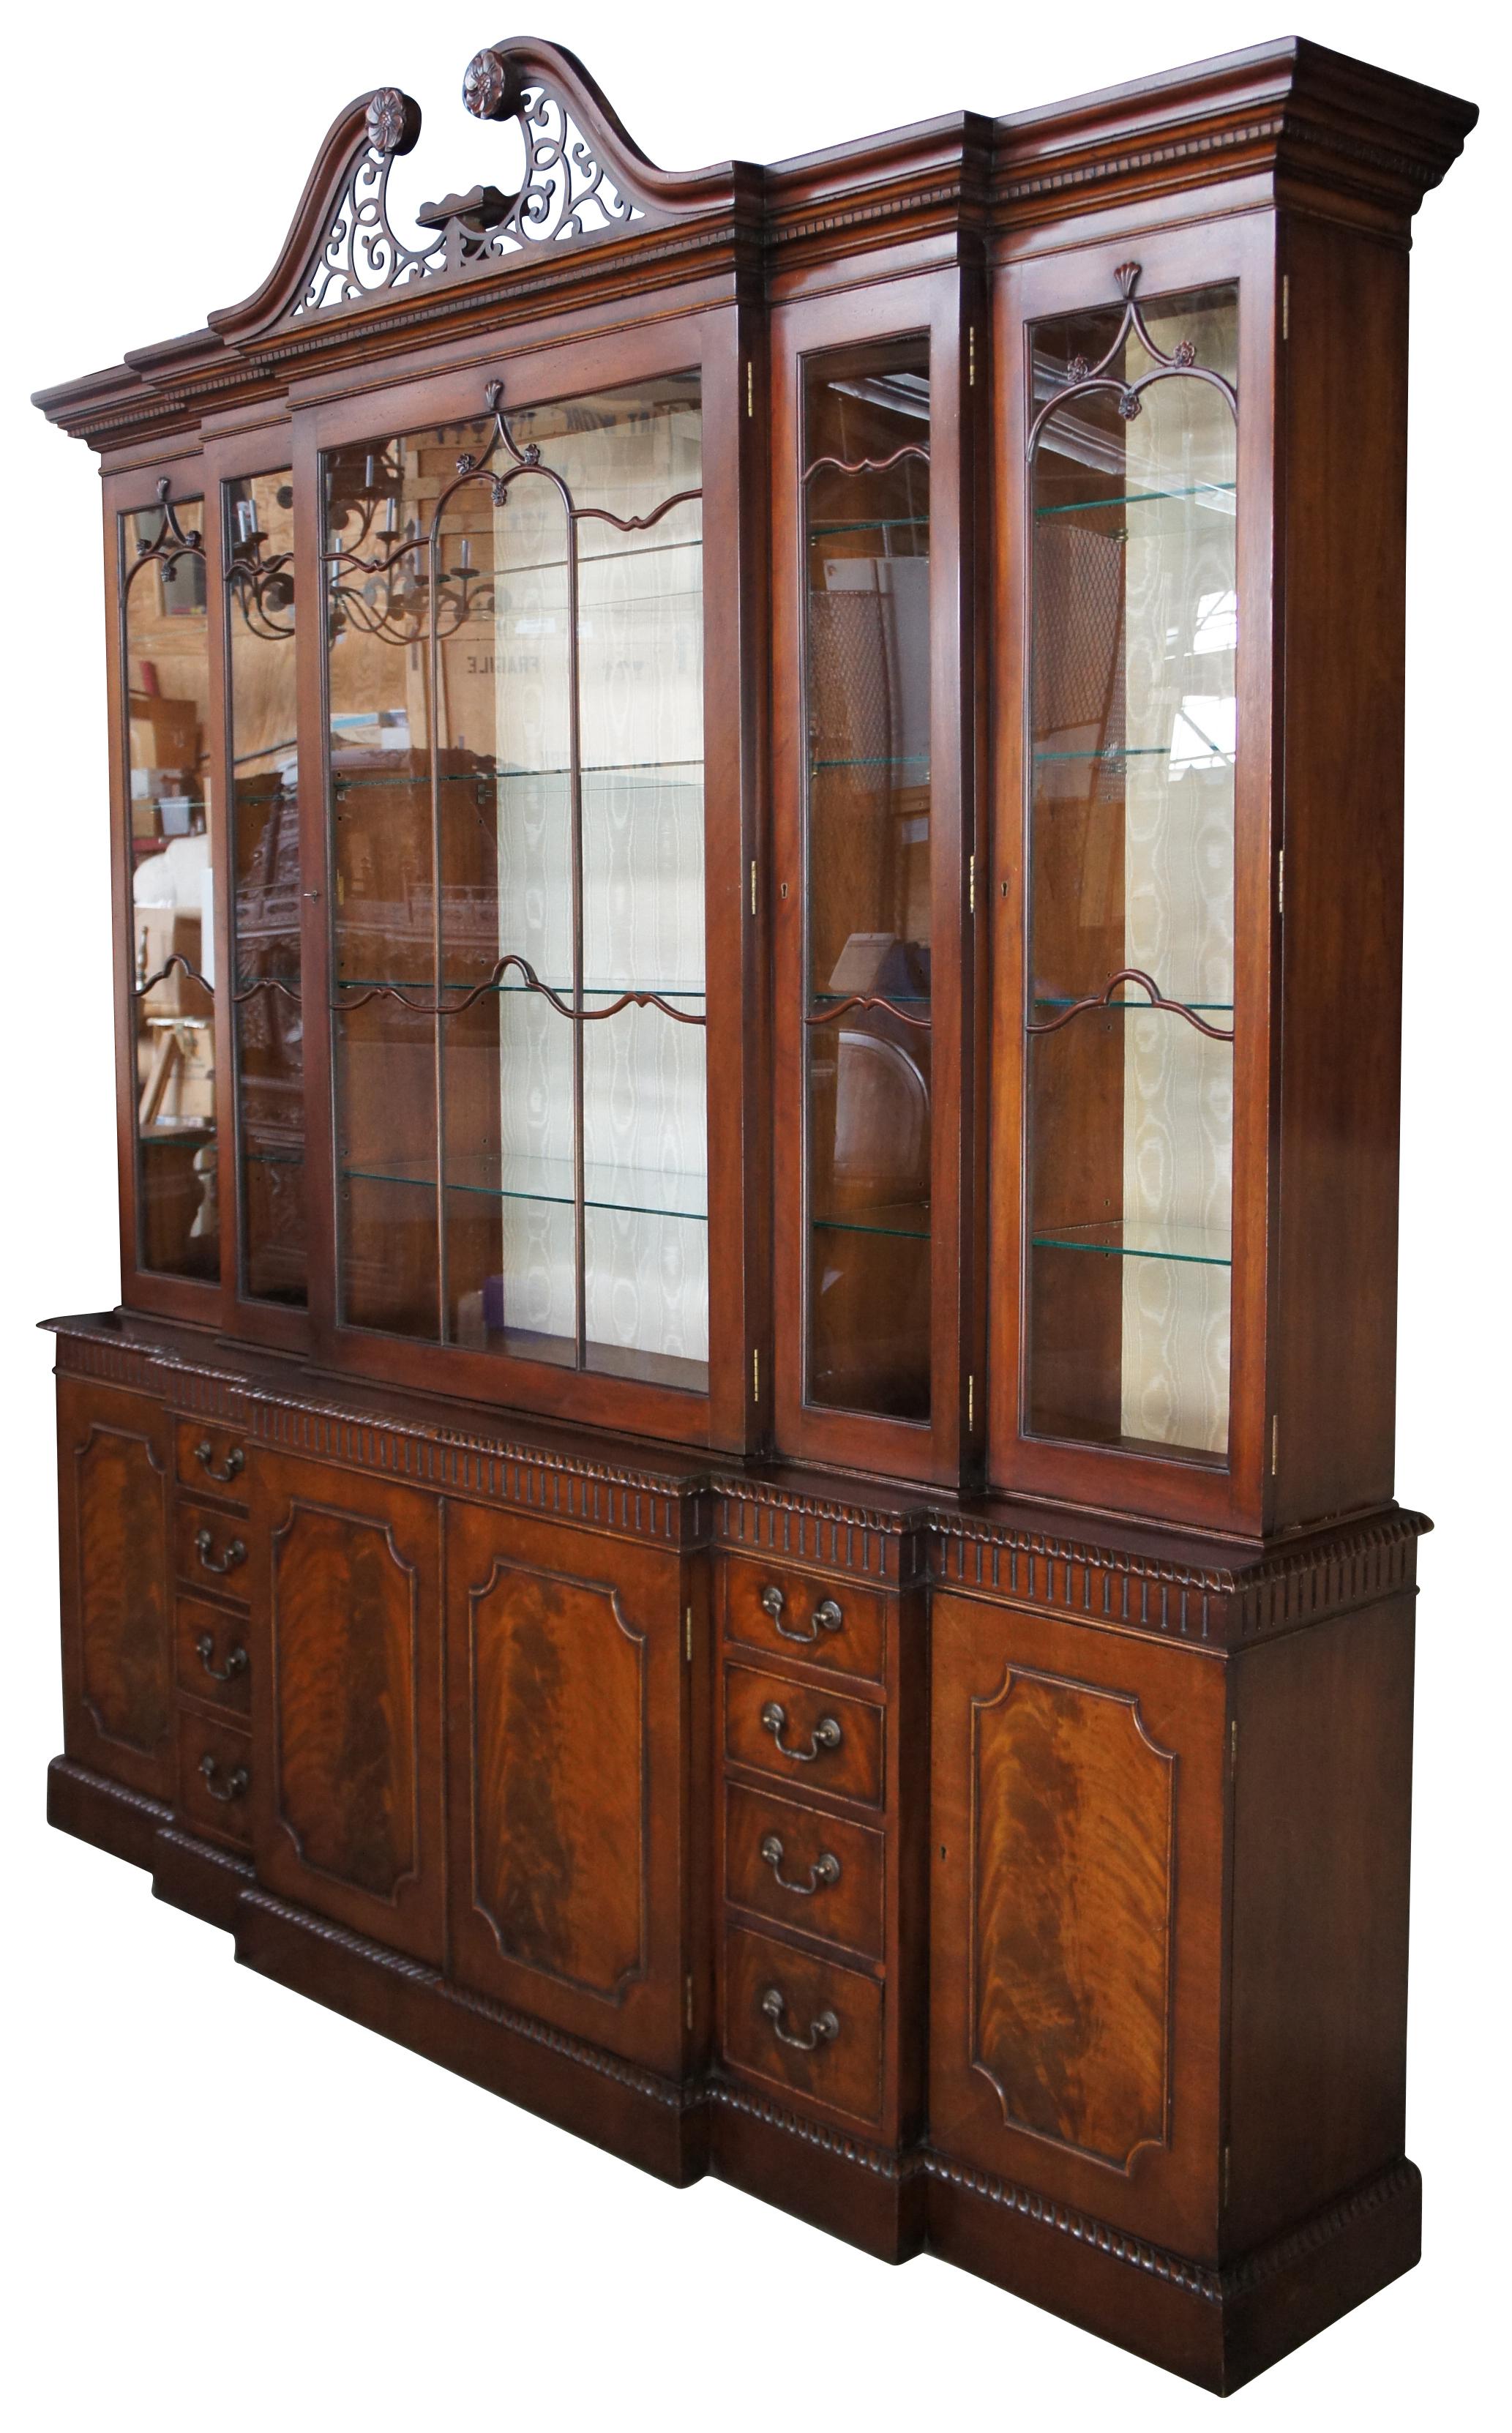 Monumental Chippendale double breakfront, circa 1880s. Made from mahogany with a large and elegant upper illuminated display section. Includes four adjustable shelves, a silk backing, dentil carved molding and a beautiful open pediment fashioning